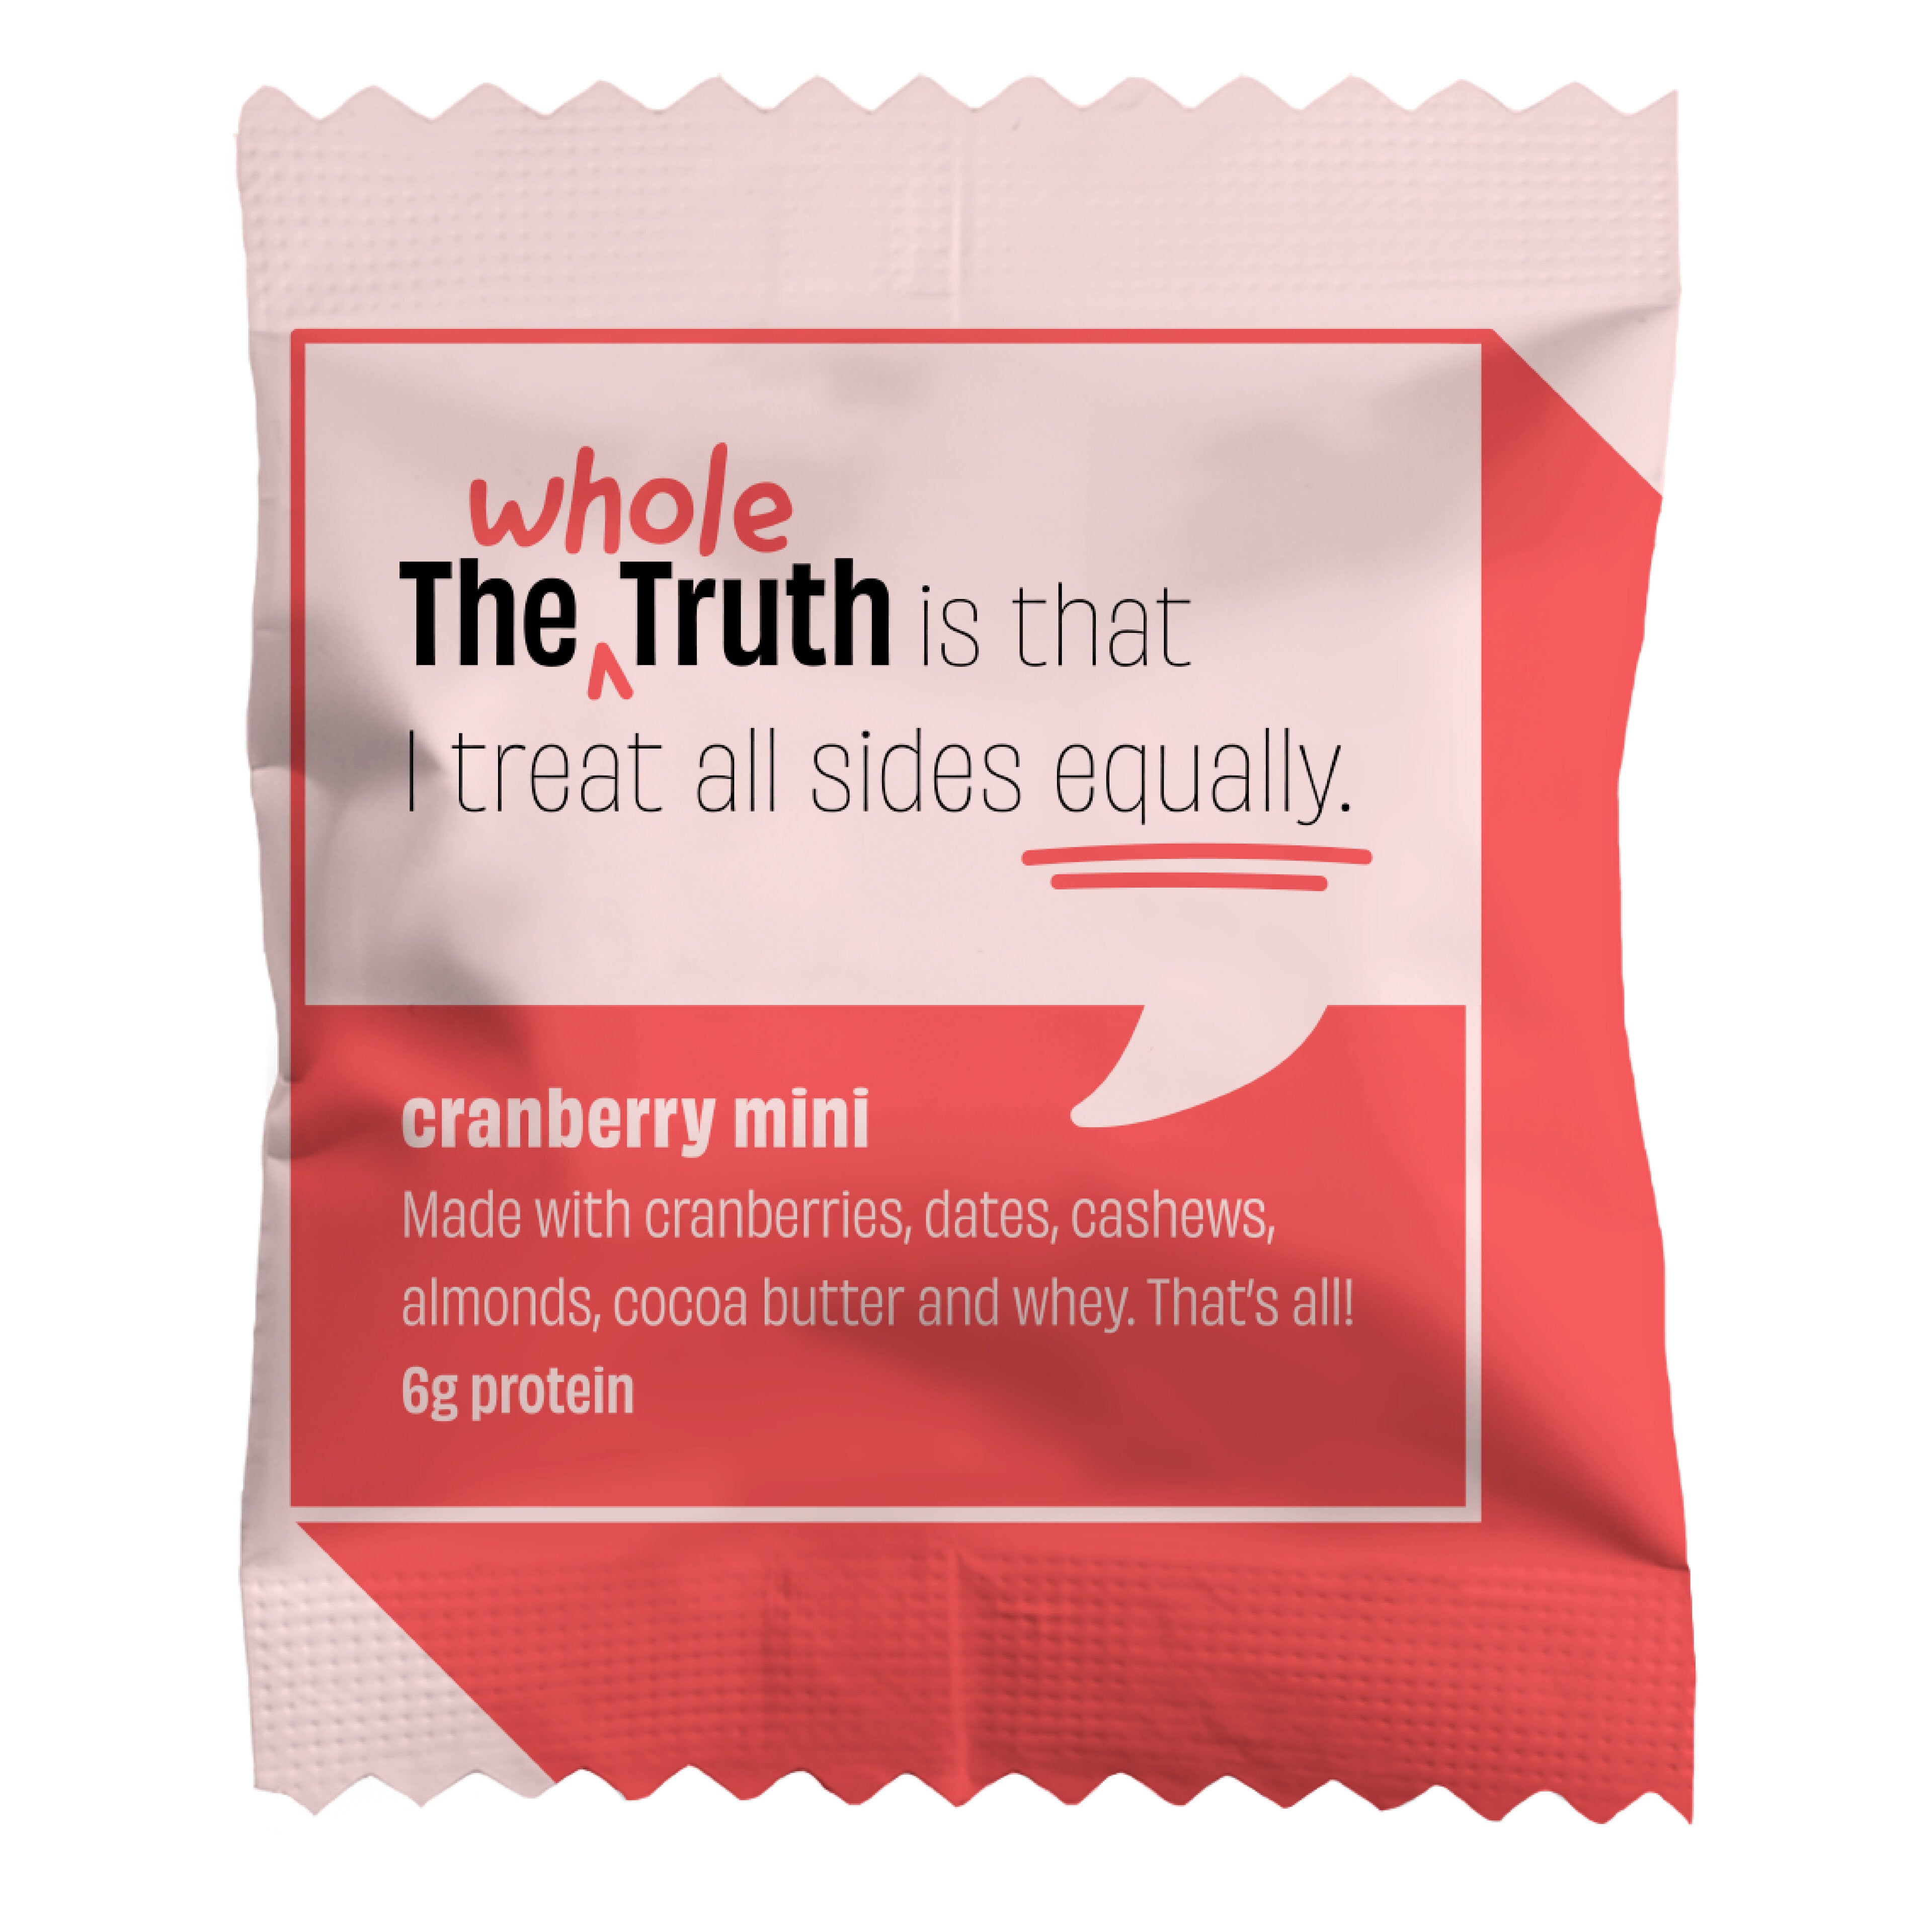 The Whole Truth - Mini Protein Bars - Cranberry - Pack of 8-8 x 27g - No Added Sugar - All Natural